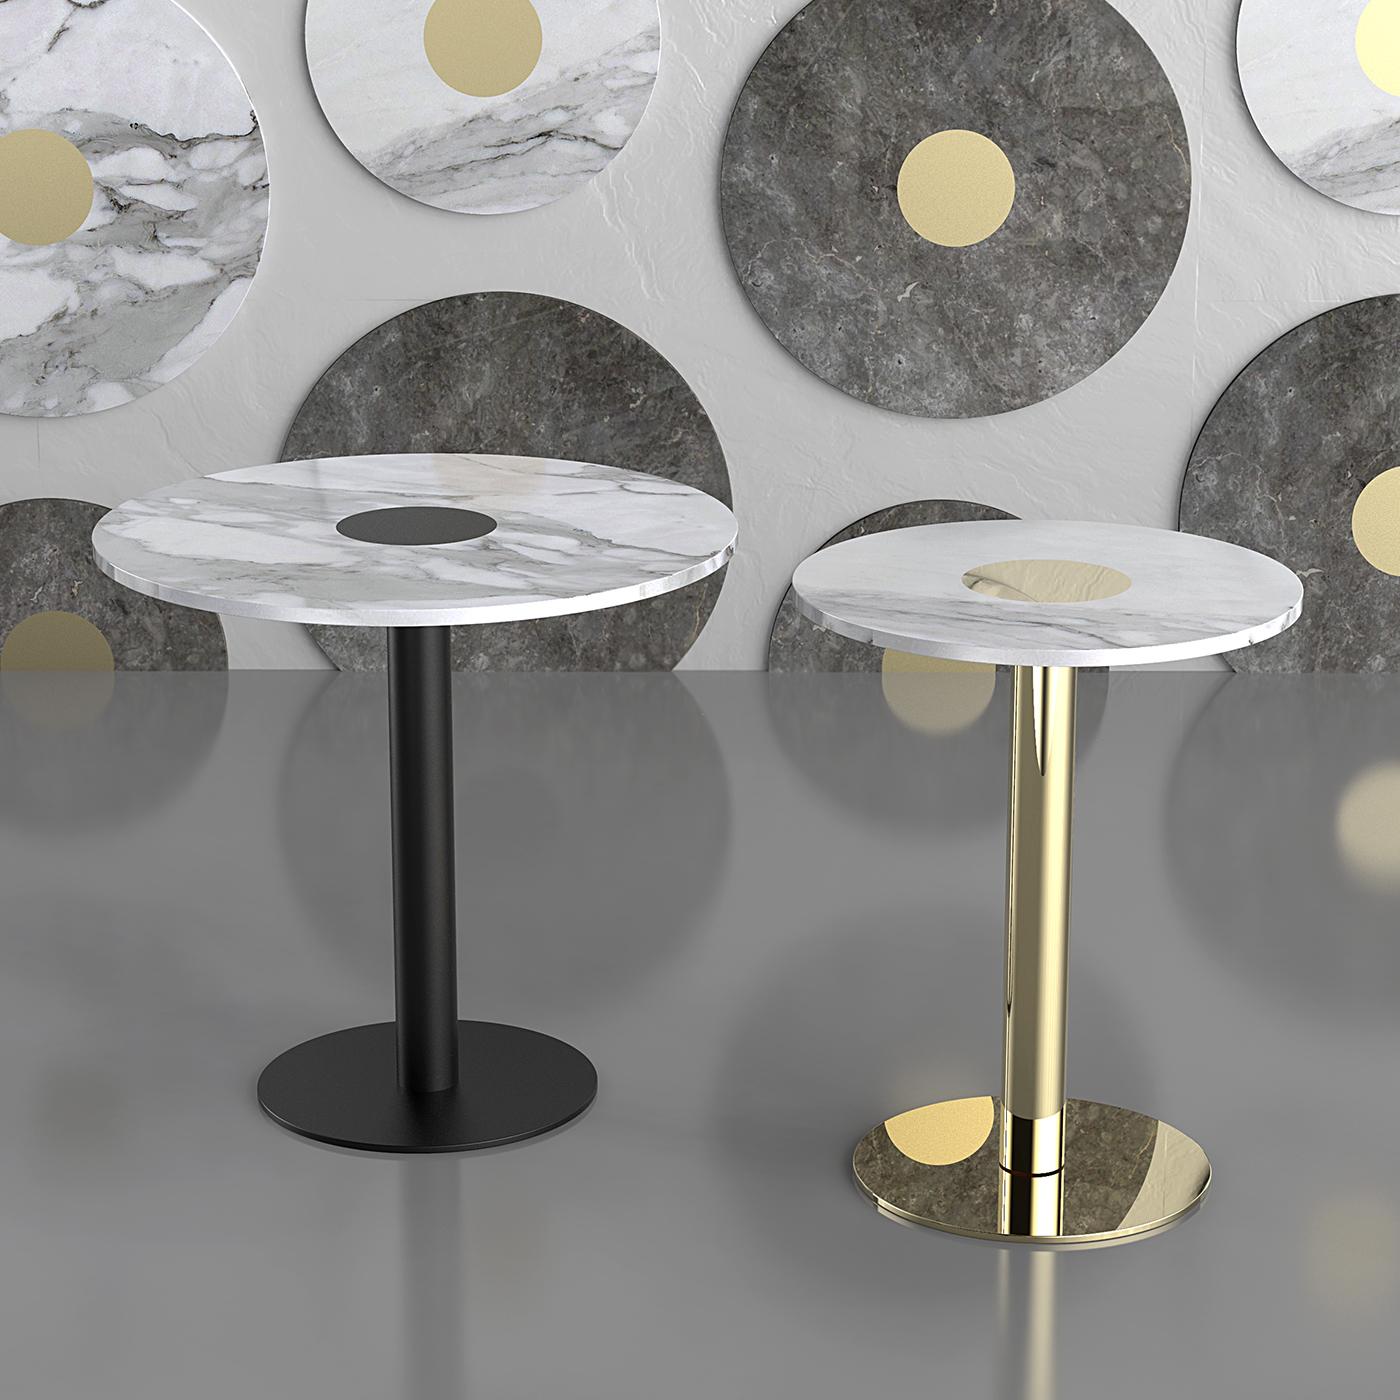 This stunning side table combines Parisian cafe vibes with a bold modern allure. Pairing a brass pedestal base with a luxurious Calacatta marble top, The Coccaro Brass Bistro Table is characterized by compact dimensions and sleek lines, making it